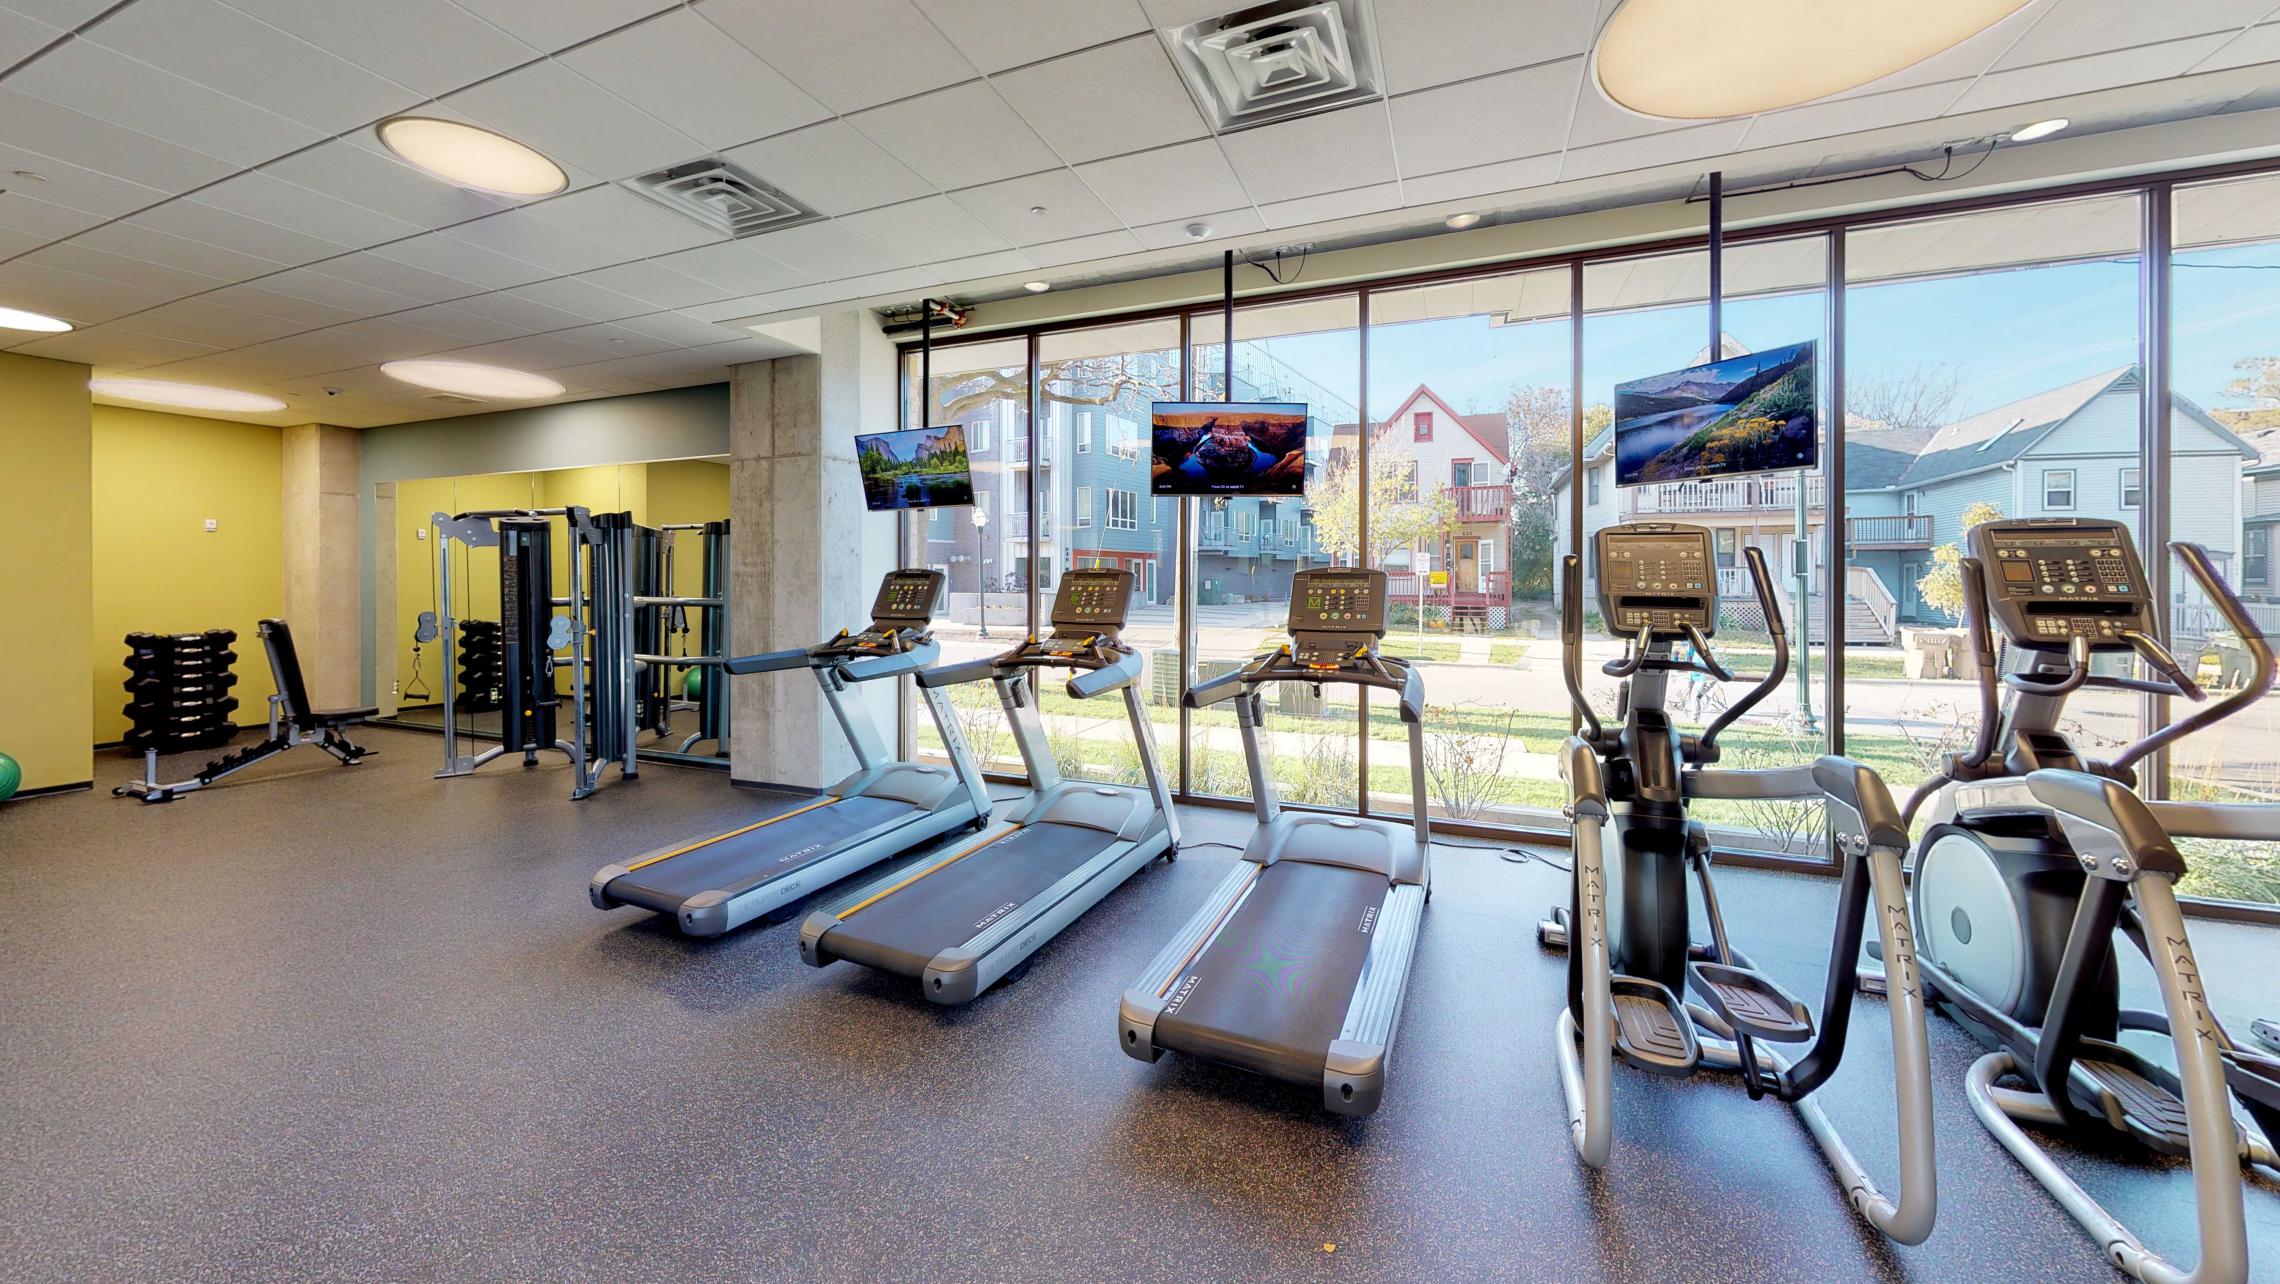 Nine-Line-Common-Fitness-Upscale-Gym-Workout-Modern-Luxury-Apartments-Downtown-Madison.jpg